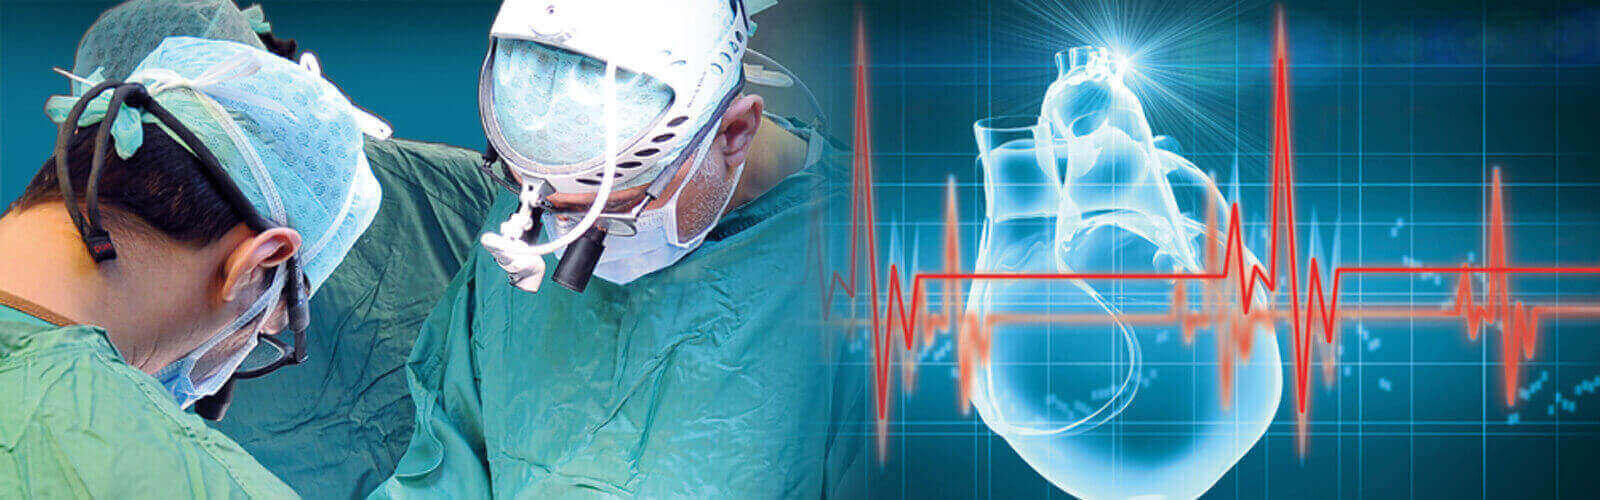 Coronary Angioplasty Surgery in Middle East